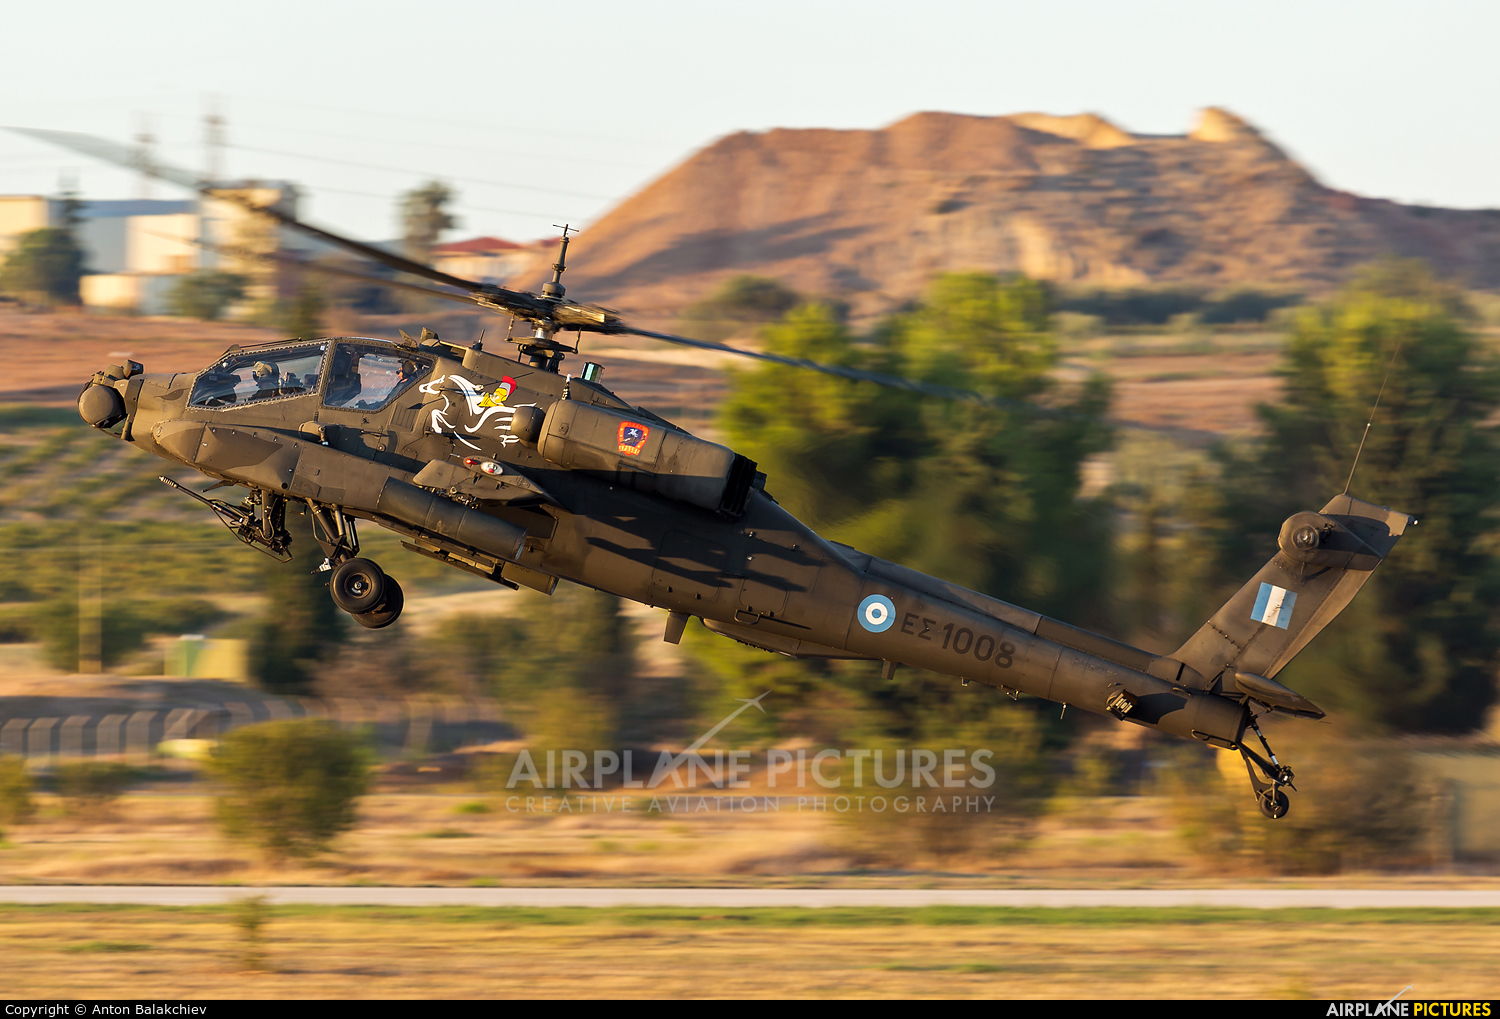 Greece - Hellenic Army ES1008 aircraft at Tanagra